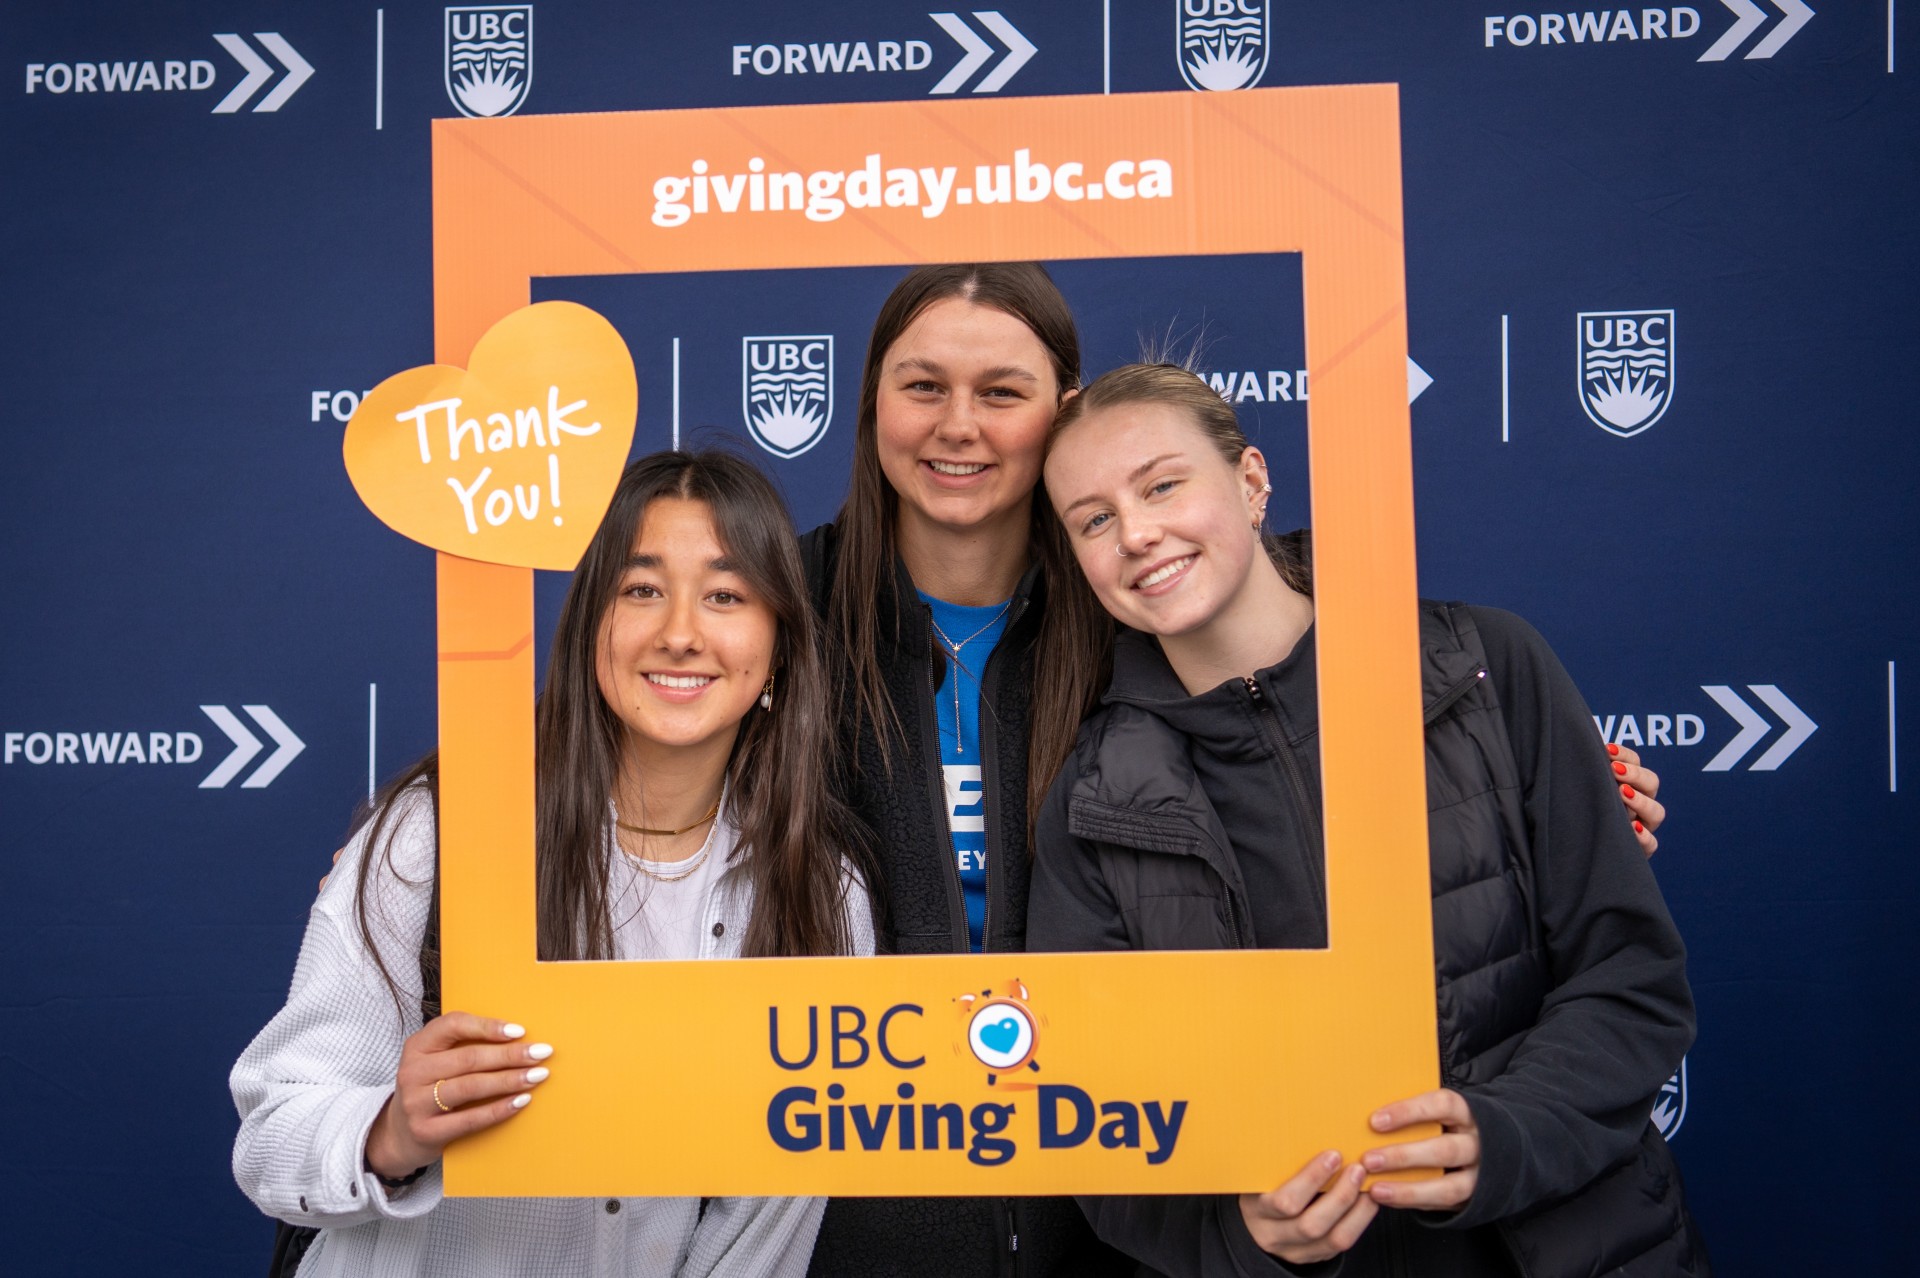 Three volunteers posing with photo frame at UBC Giving Day event.